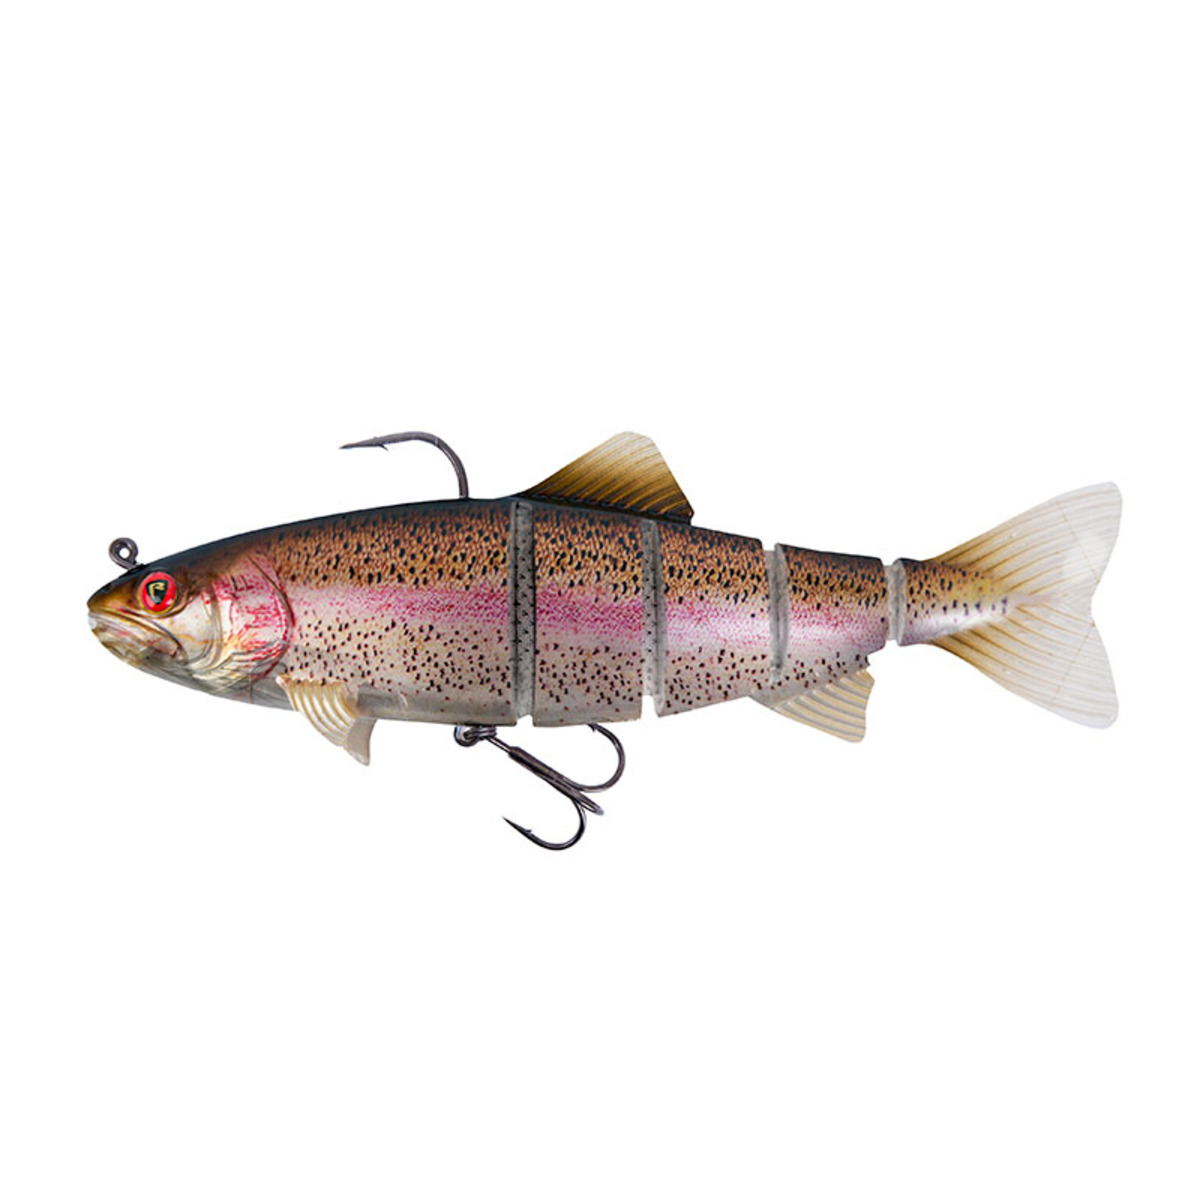 Fox Rage Realistic Replicant Trout Jointed 18 Cm 7" 110g - Supernatural Rainbow Trout